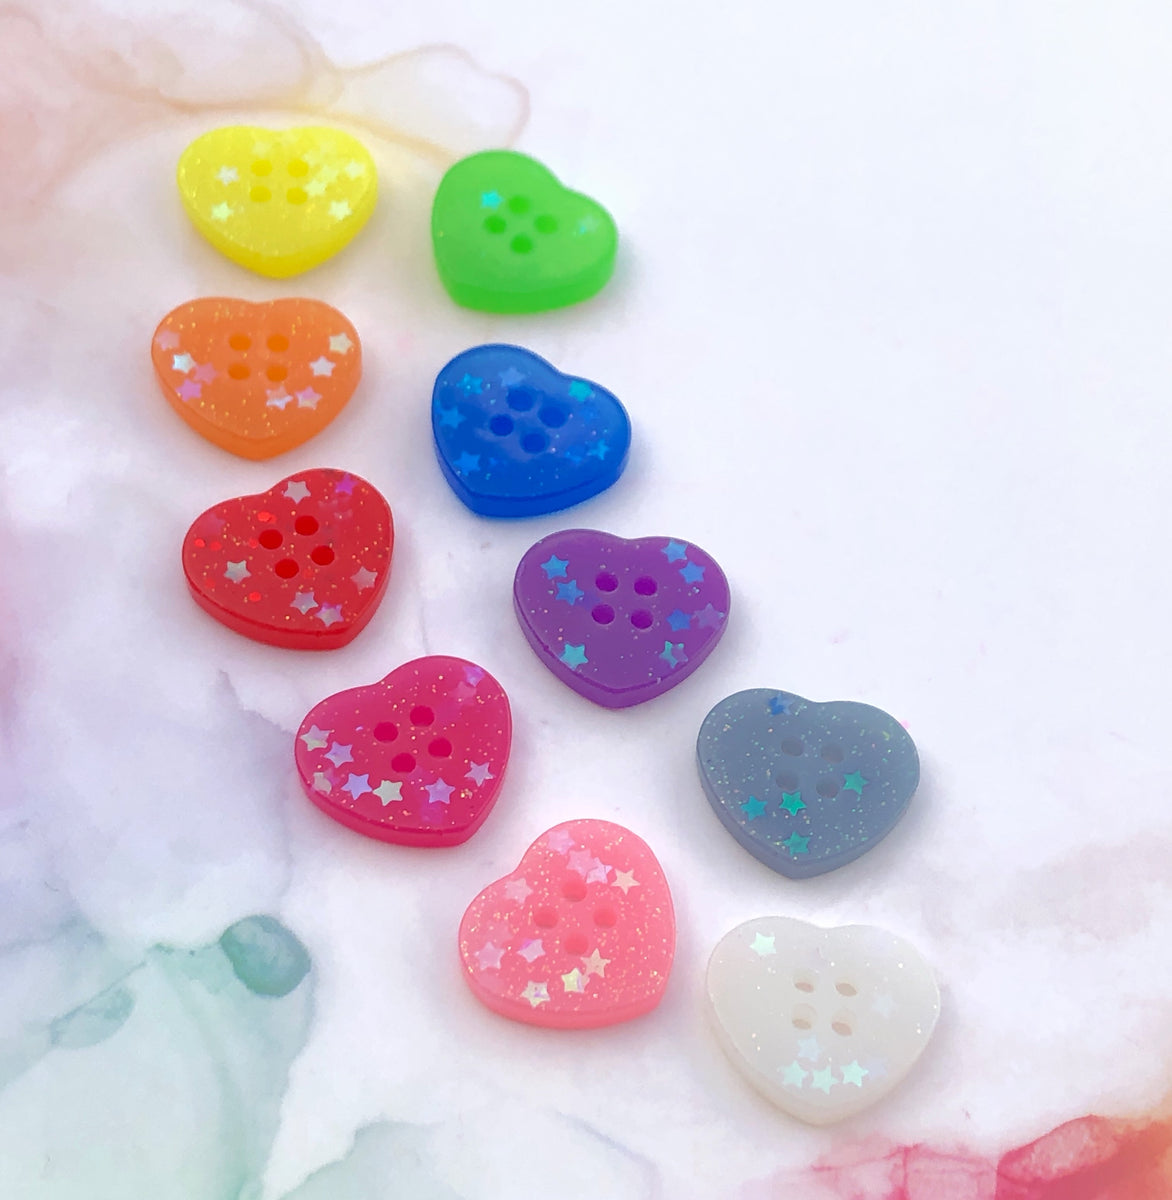 24, 48 or 96 11mm Heart buttons, random mix heart, sewing crafts 11 mm  7/16 hearts Valentine button plastic hearts 11mm